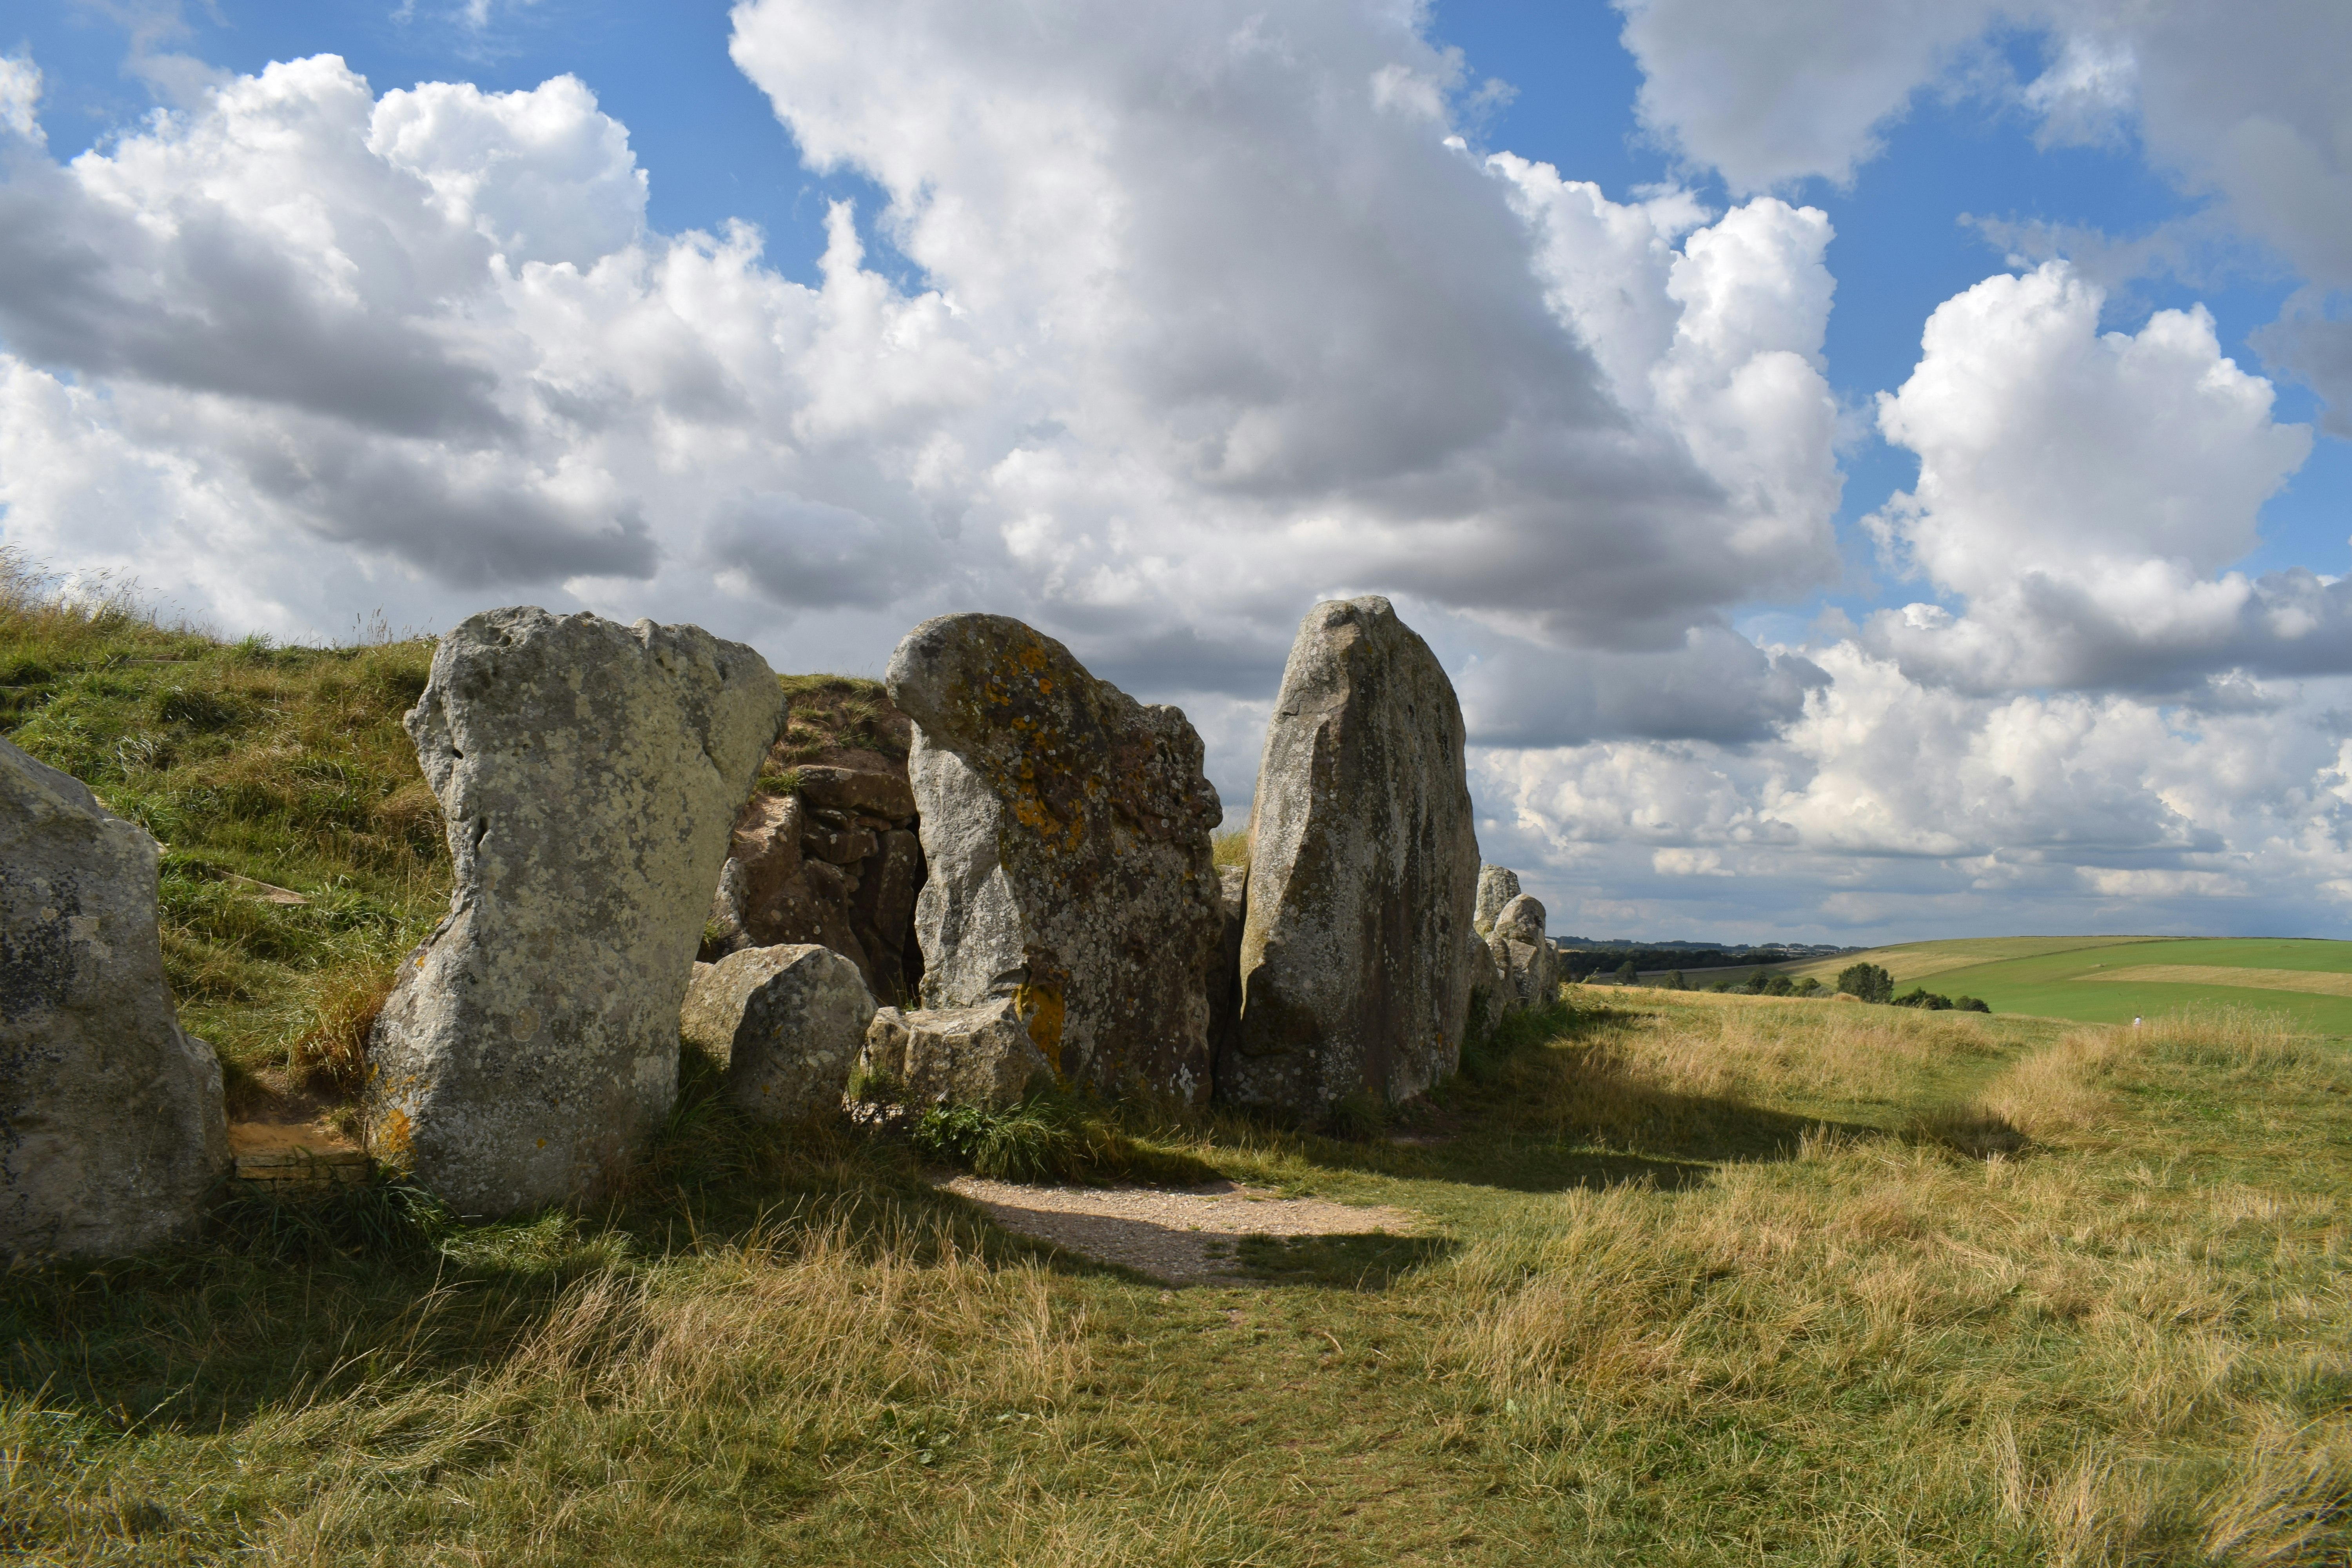 A pile of large stones standing on their ends surrounding a mound of earth